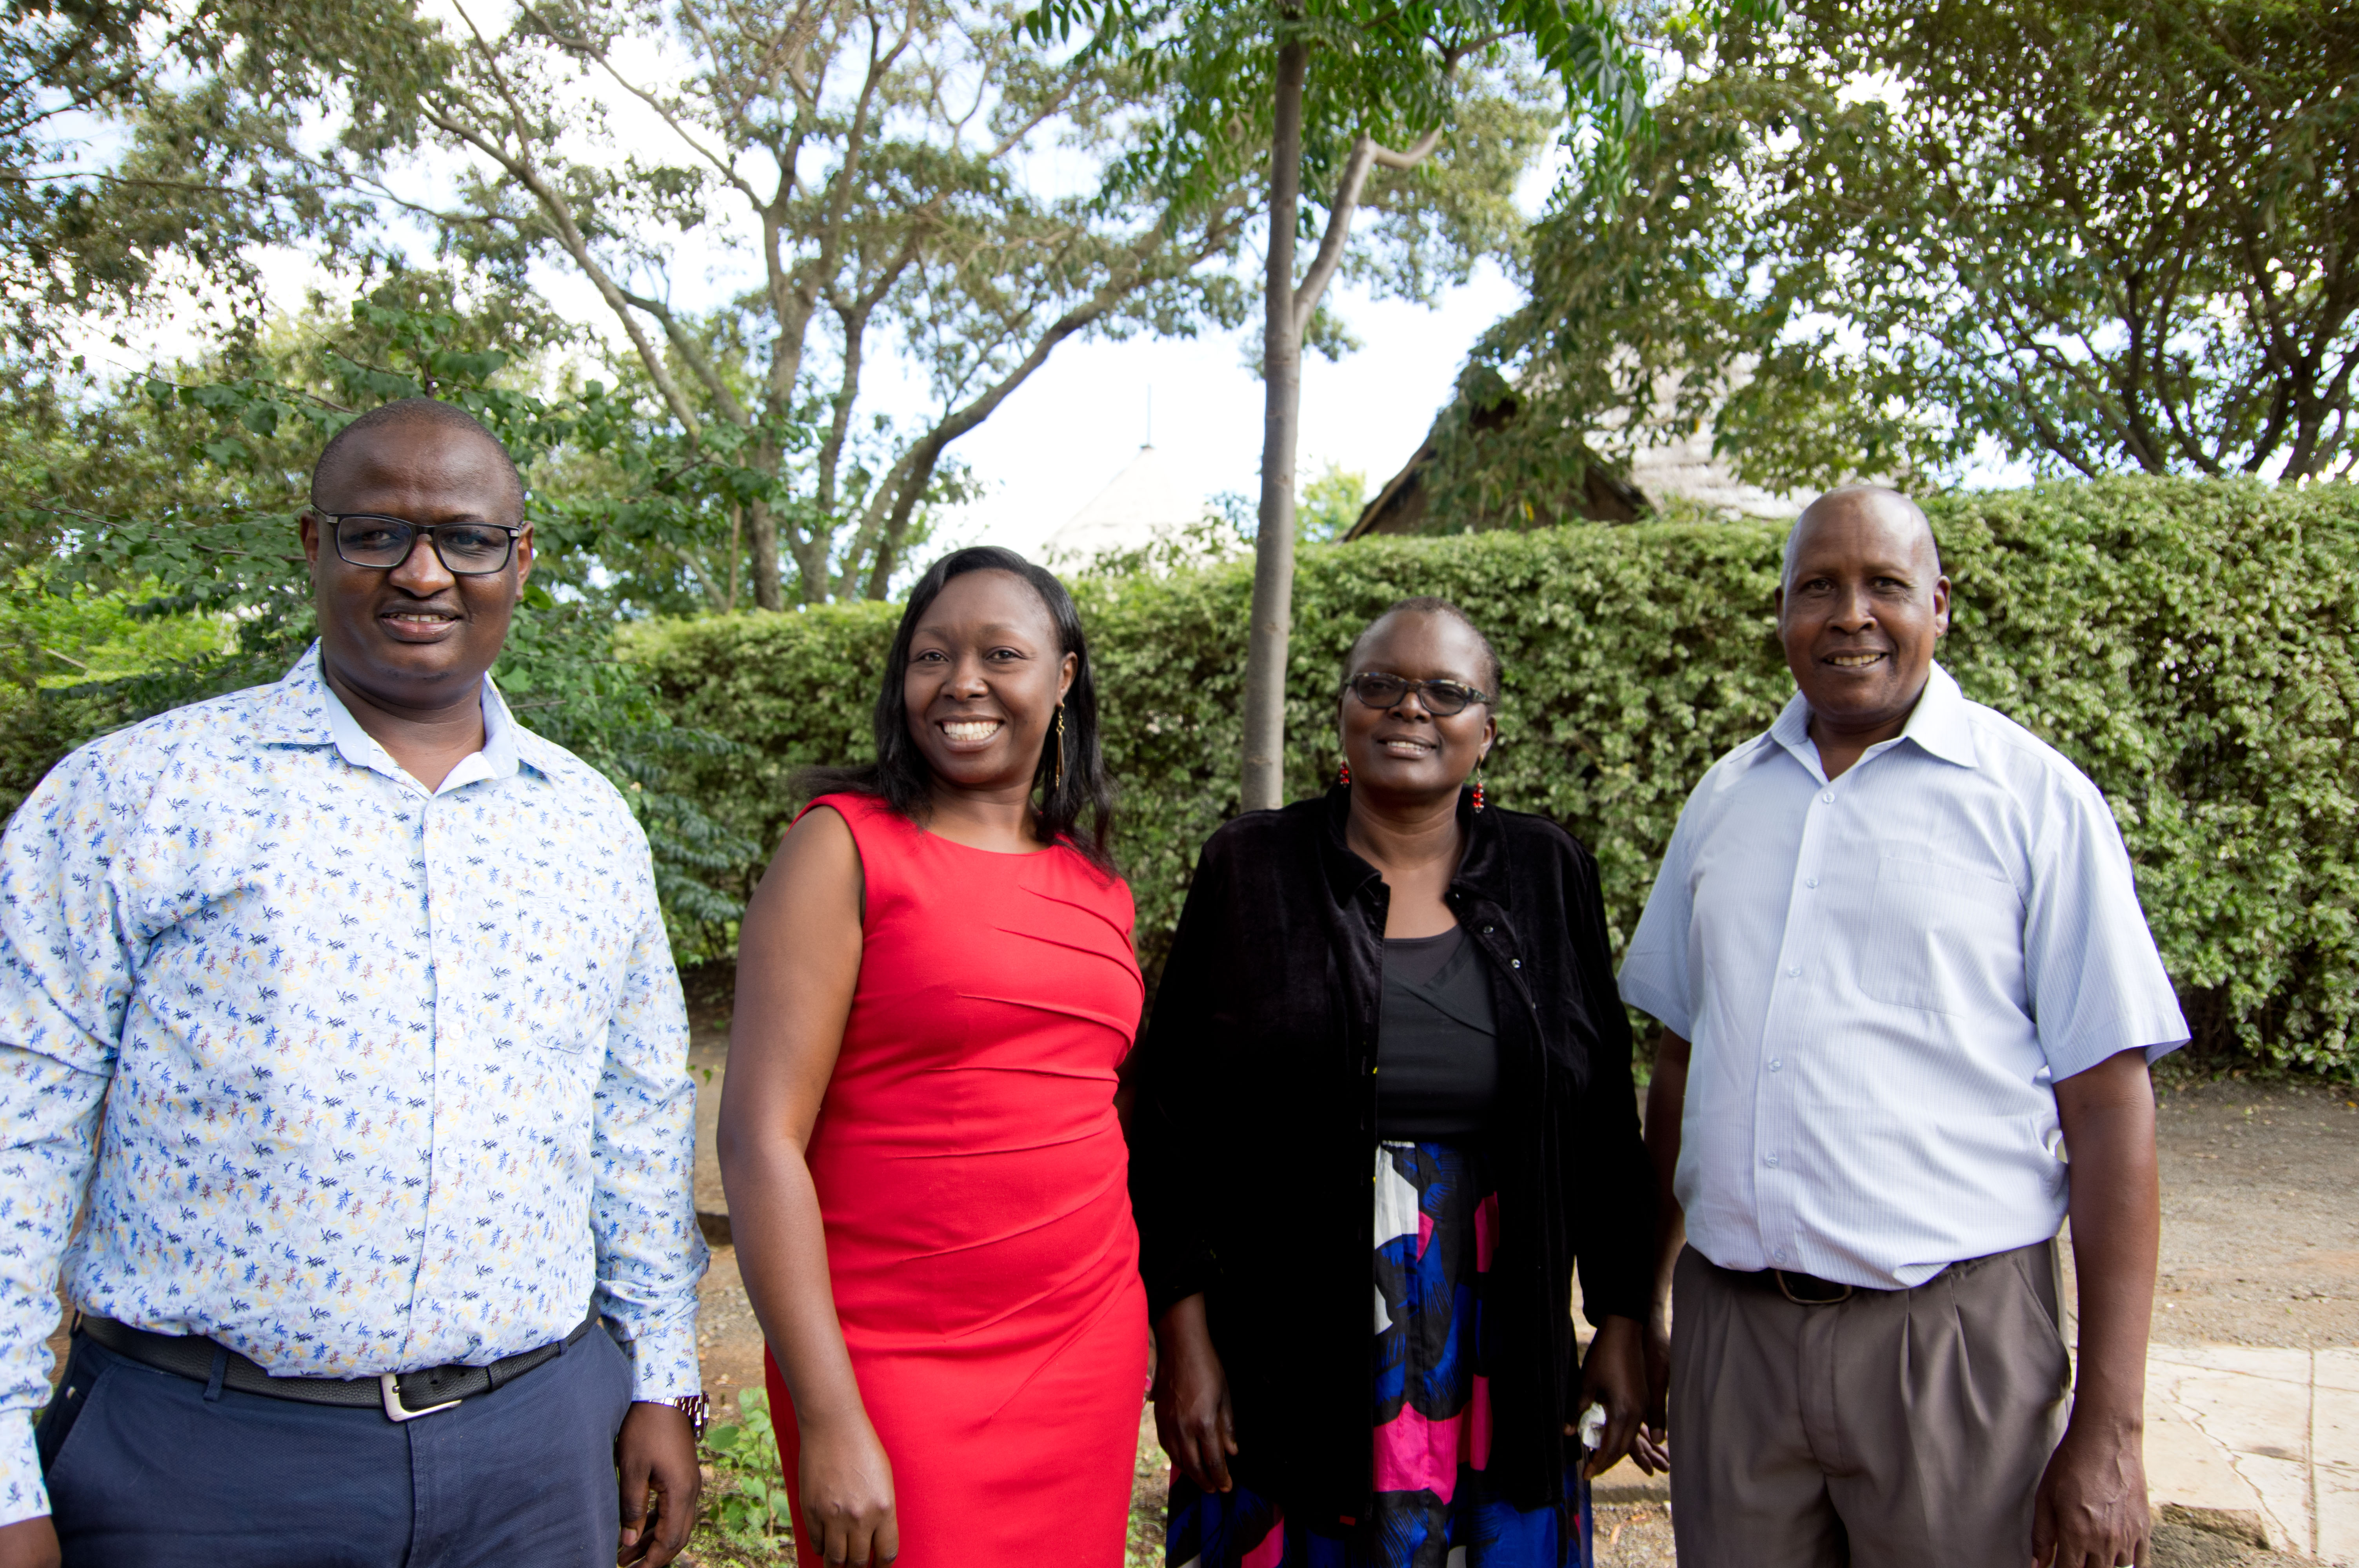 Four Kenyan adults smiling, two men and two women. They are outside and there is a backdrop of trees.